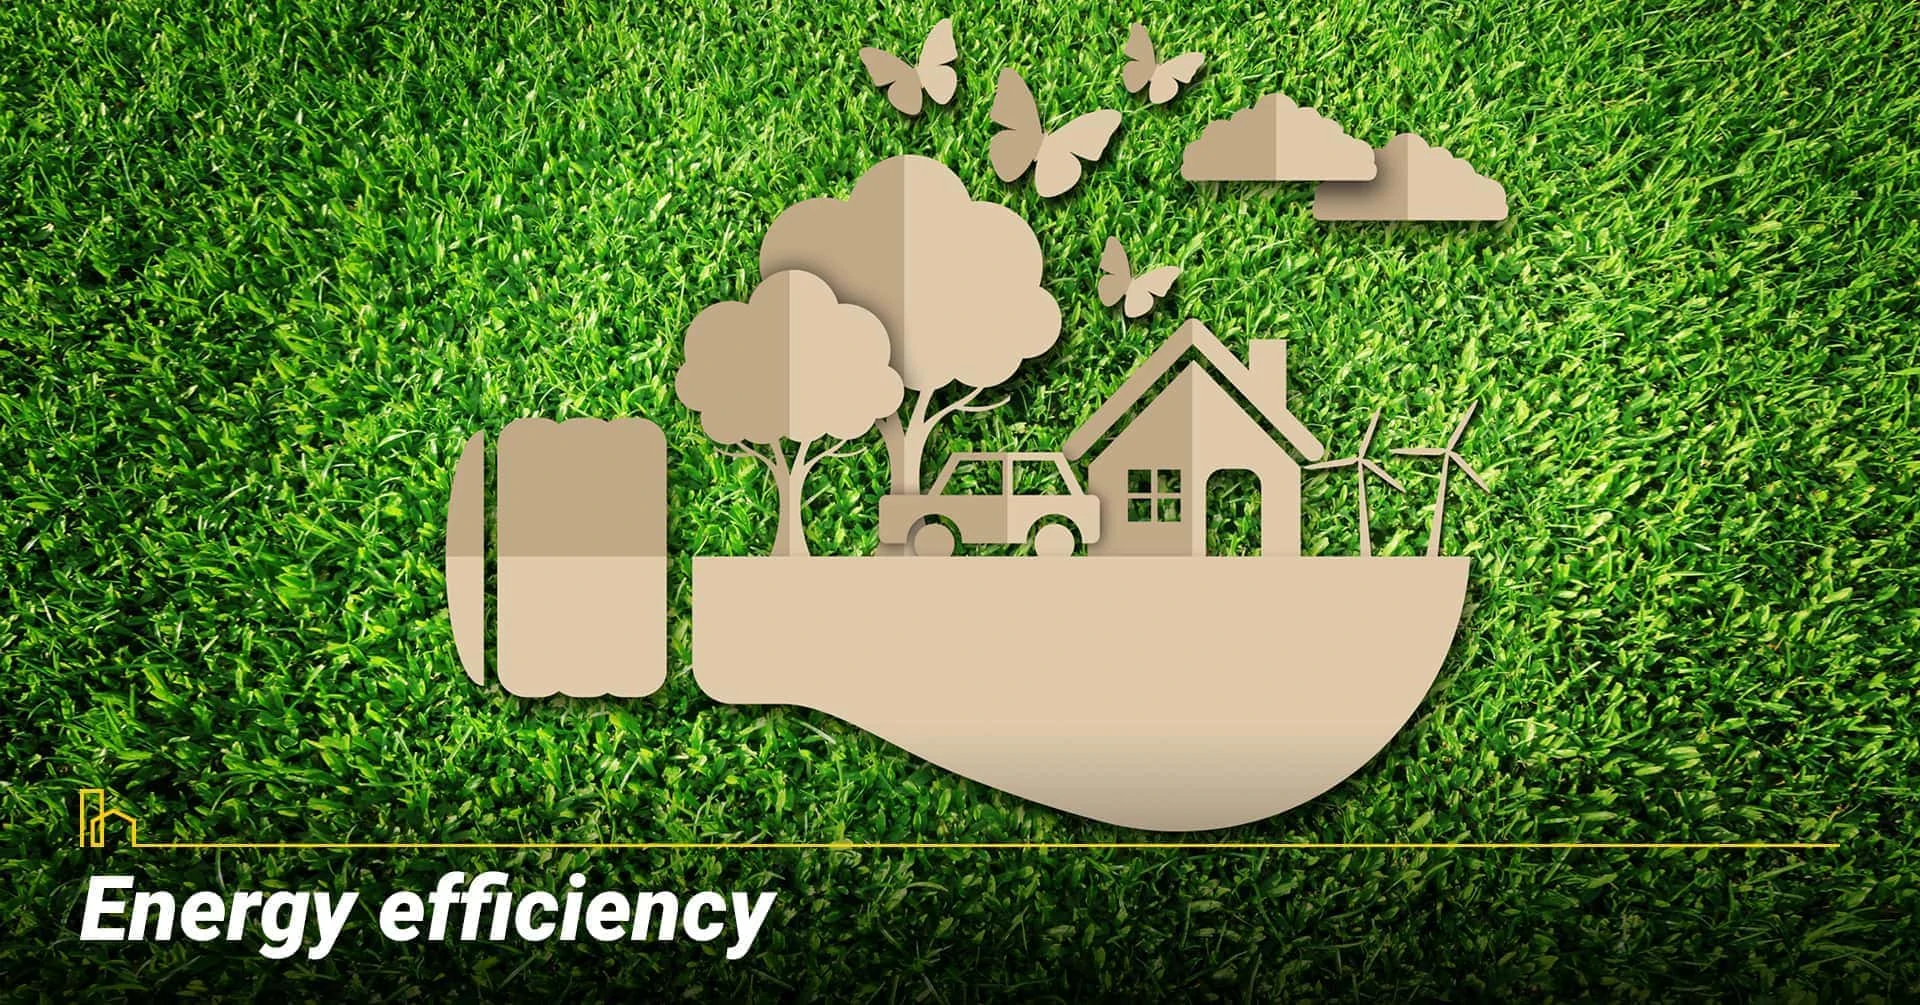 Energy efficiency, energy consumption of the property